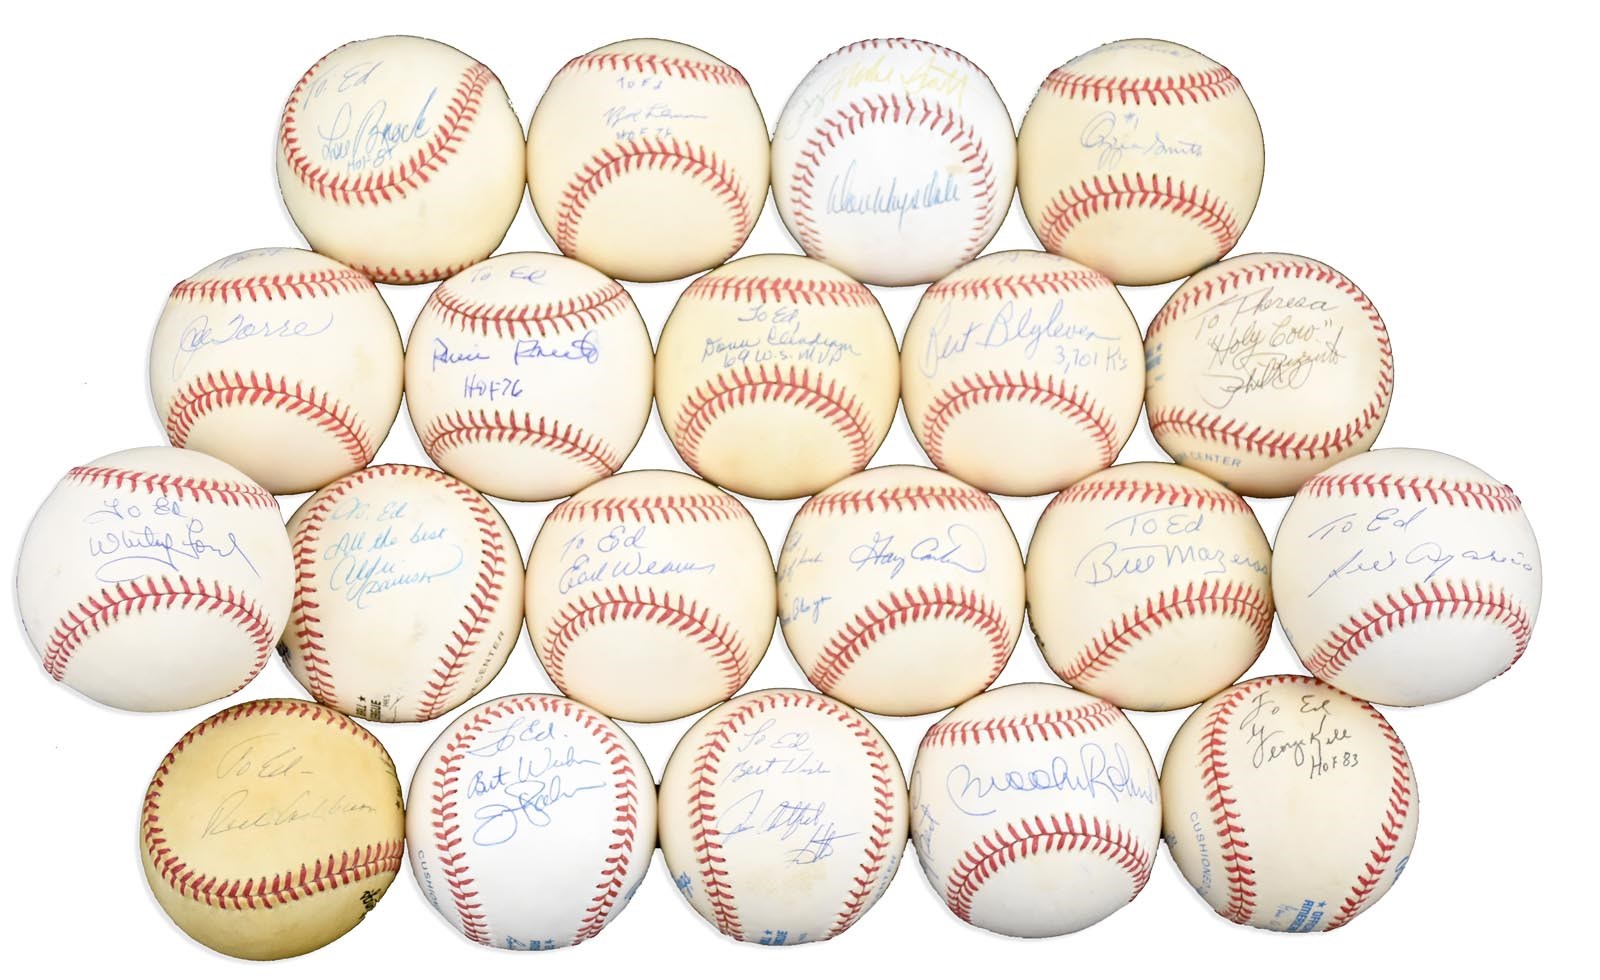 Baseball Autographs - In-Person Hall of Famers & Stars Single Signed Baseball Collection (55+)